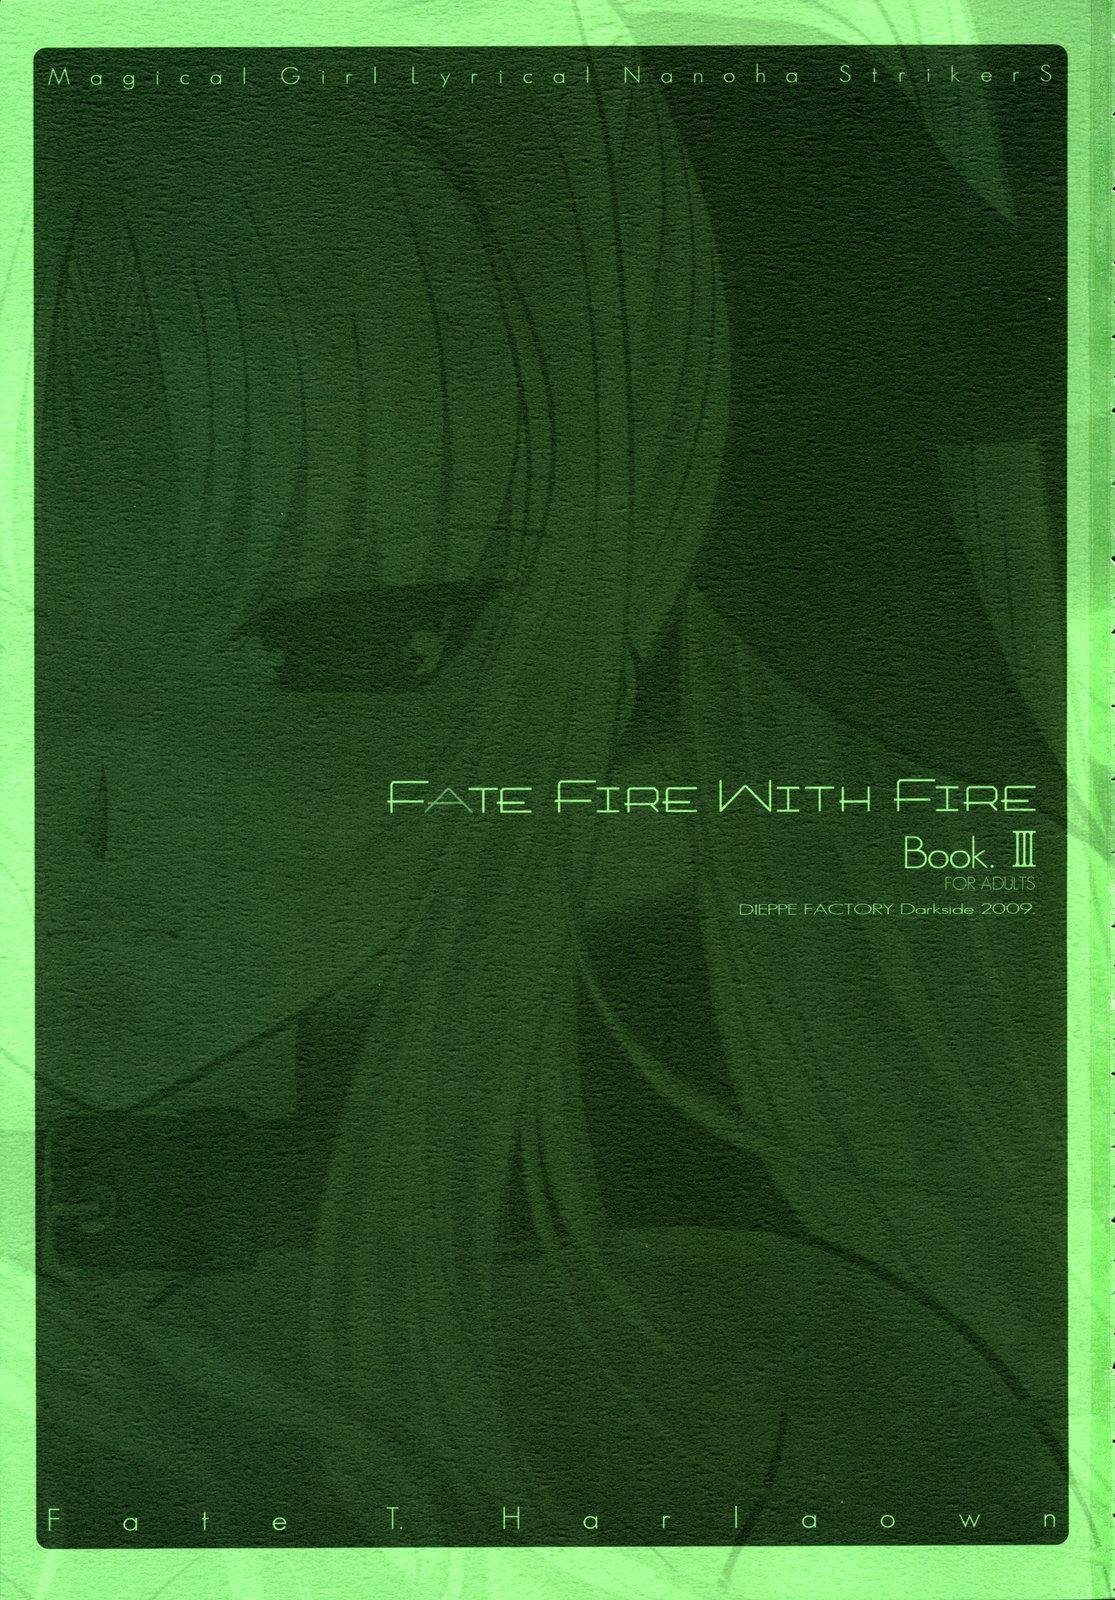 FATE FIRE WITH FIRE 3 3